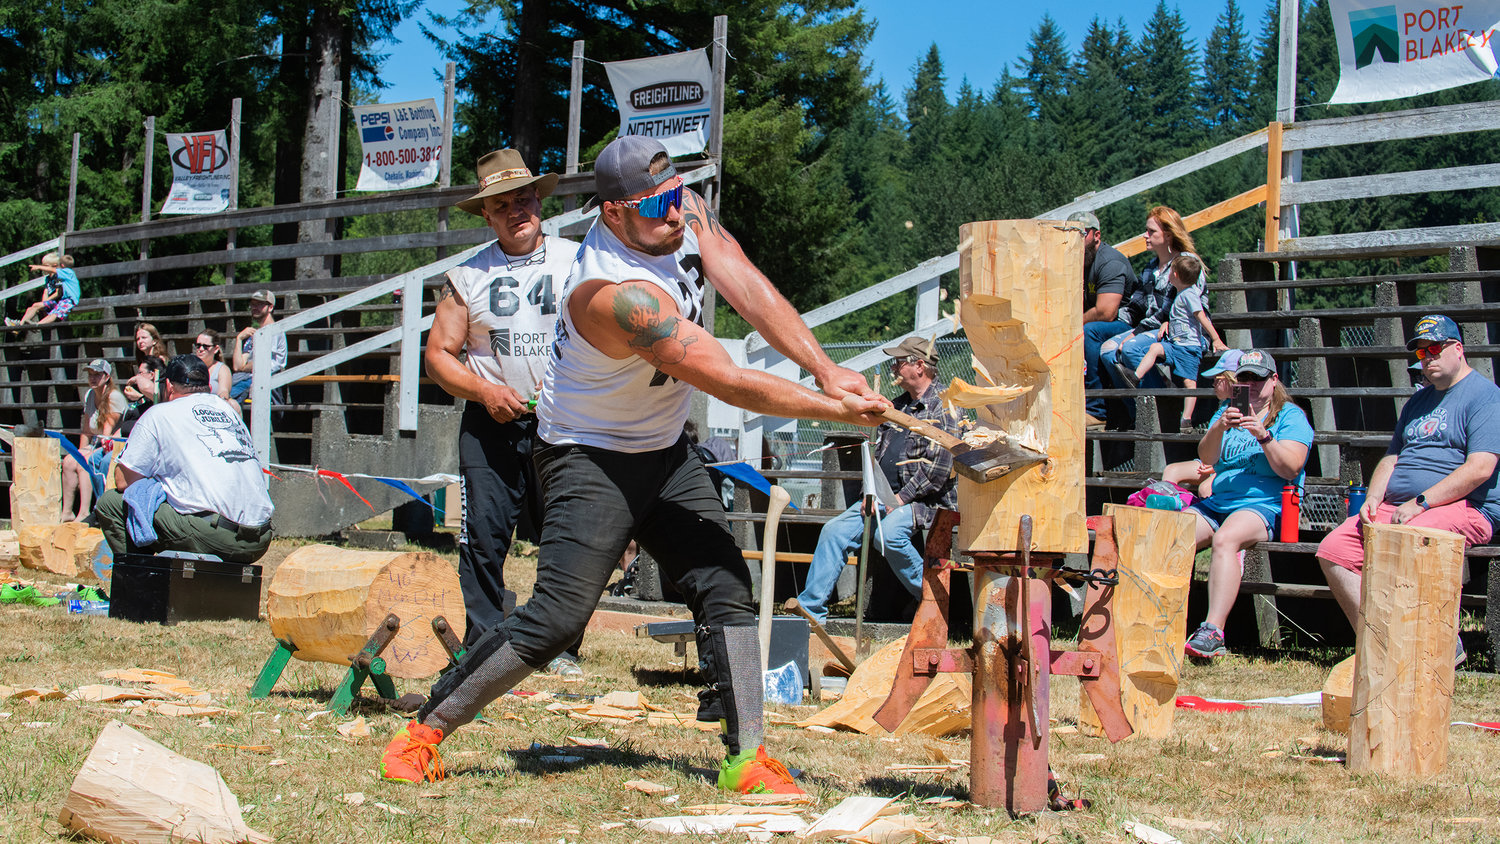 Wood splinters as Mike Johnson makes contact with his axe Sunday afternoon during the vertical chop event inside the Morton Loggers’ Jubilee Arena.